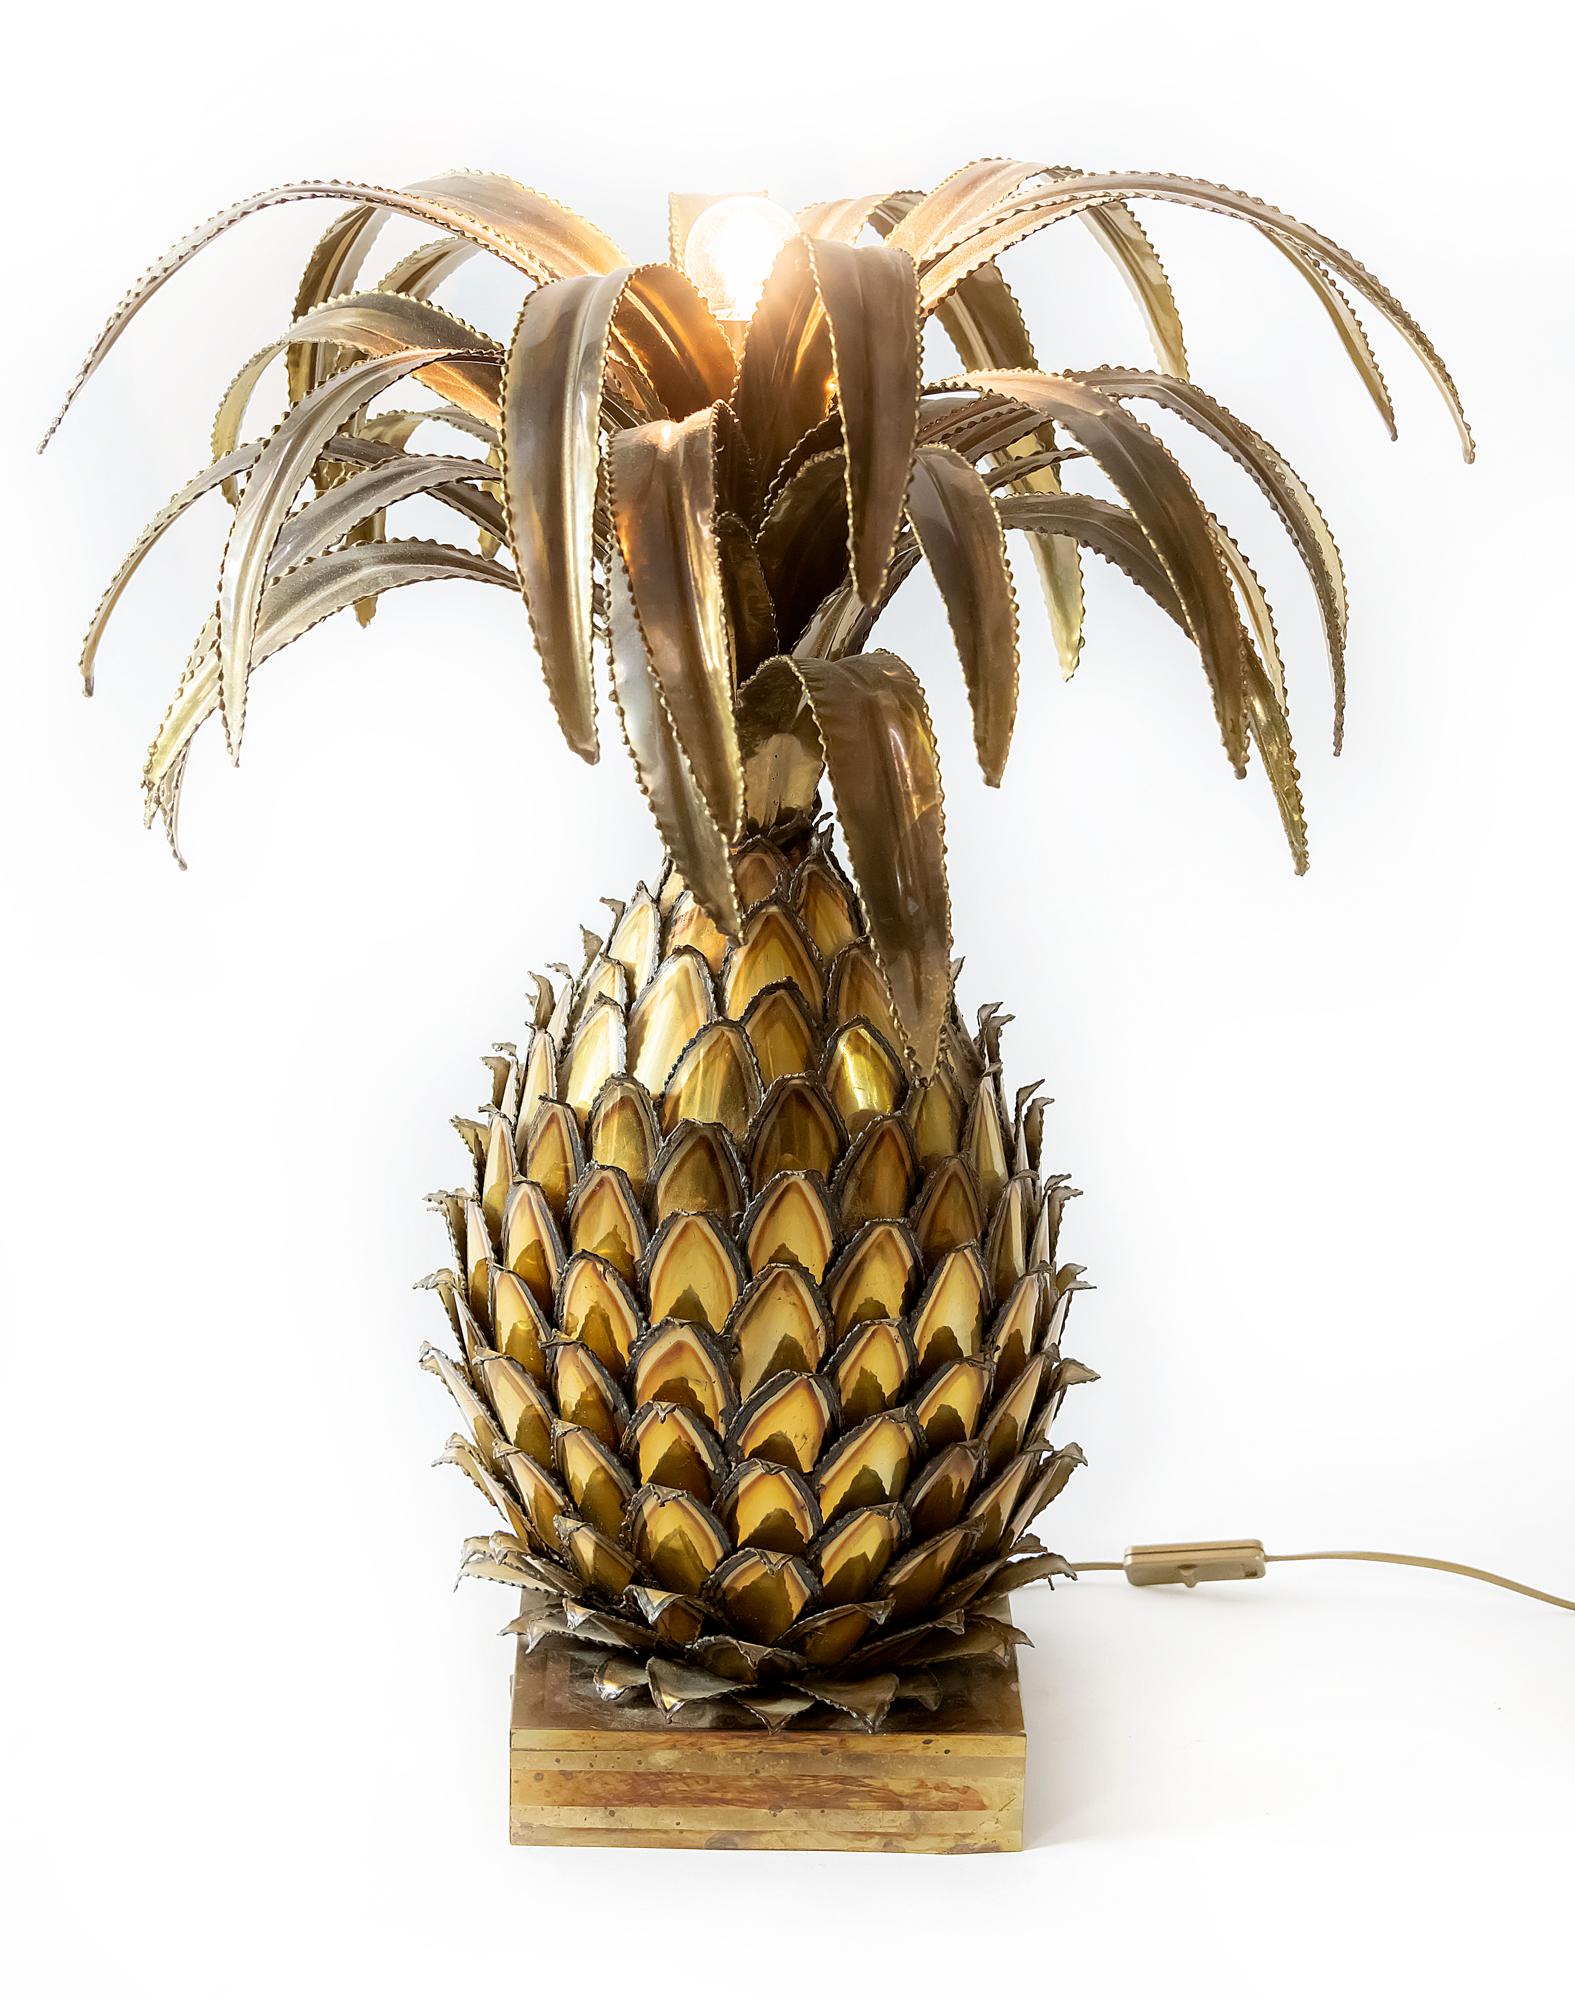 Vintage French table lamp in brass decorated like pineapple by Maison Jansen.
Lamp includes E27 bulb.

